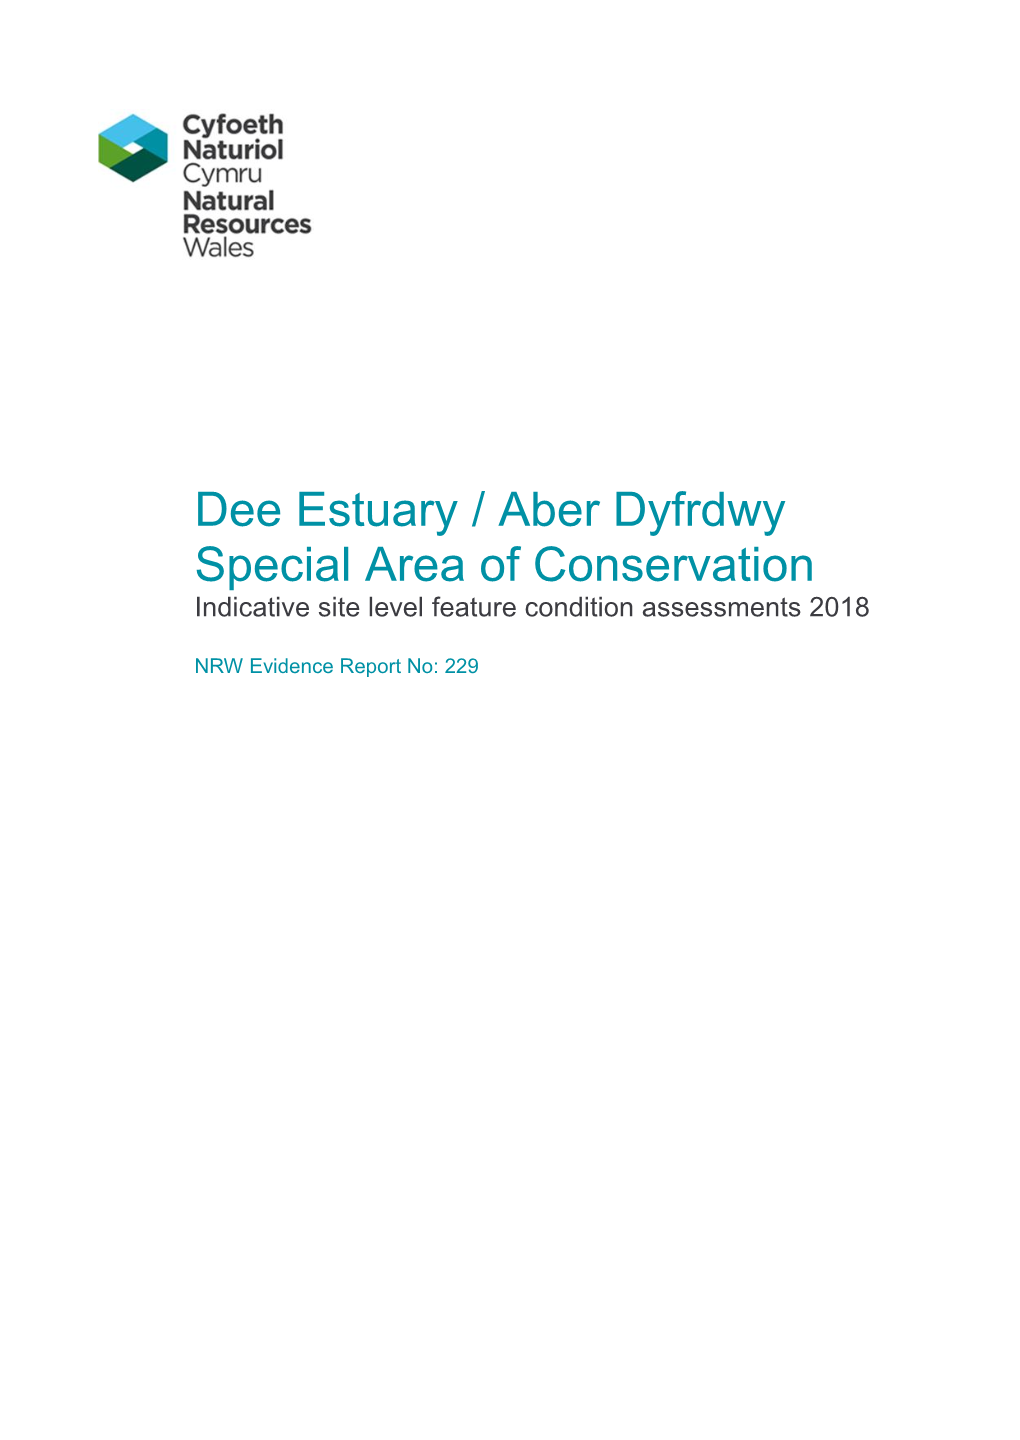 Dee Estuary / Aber Dyfrdwy Special Area of Conservation Indicative Site Level Feature Condition Assessments 2018